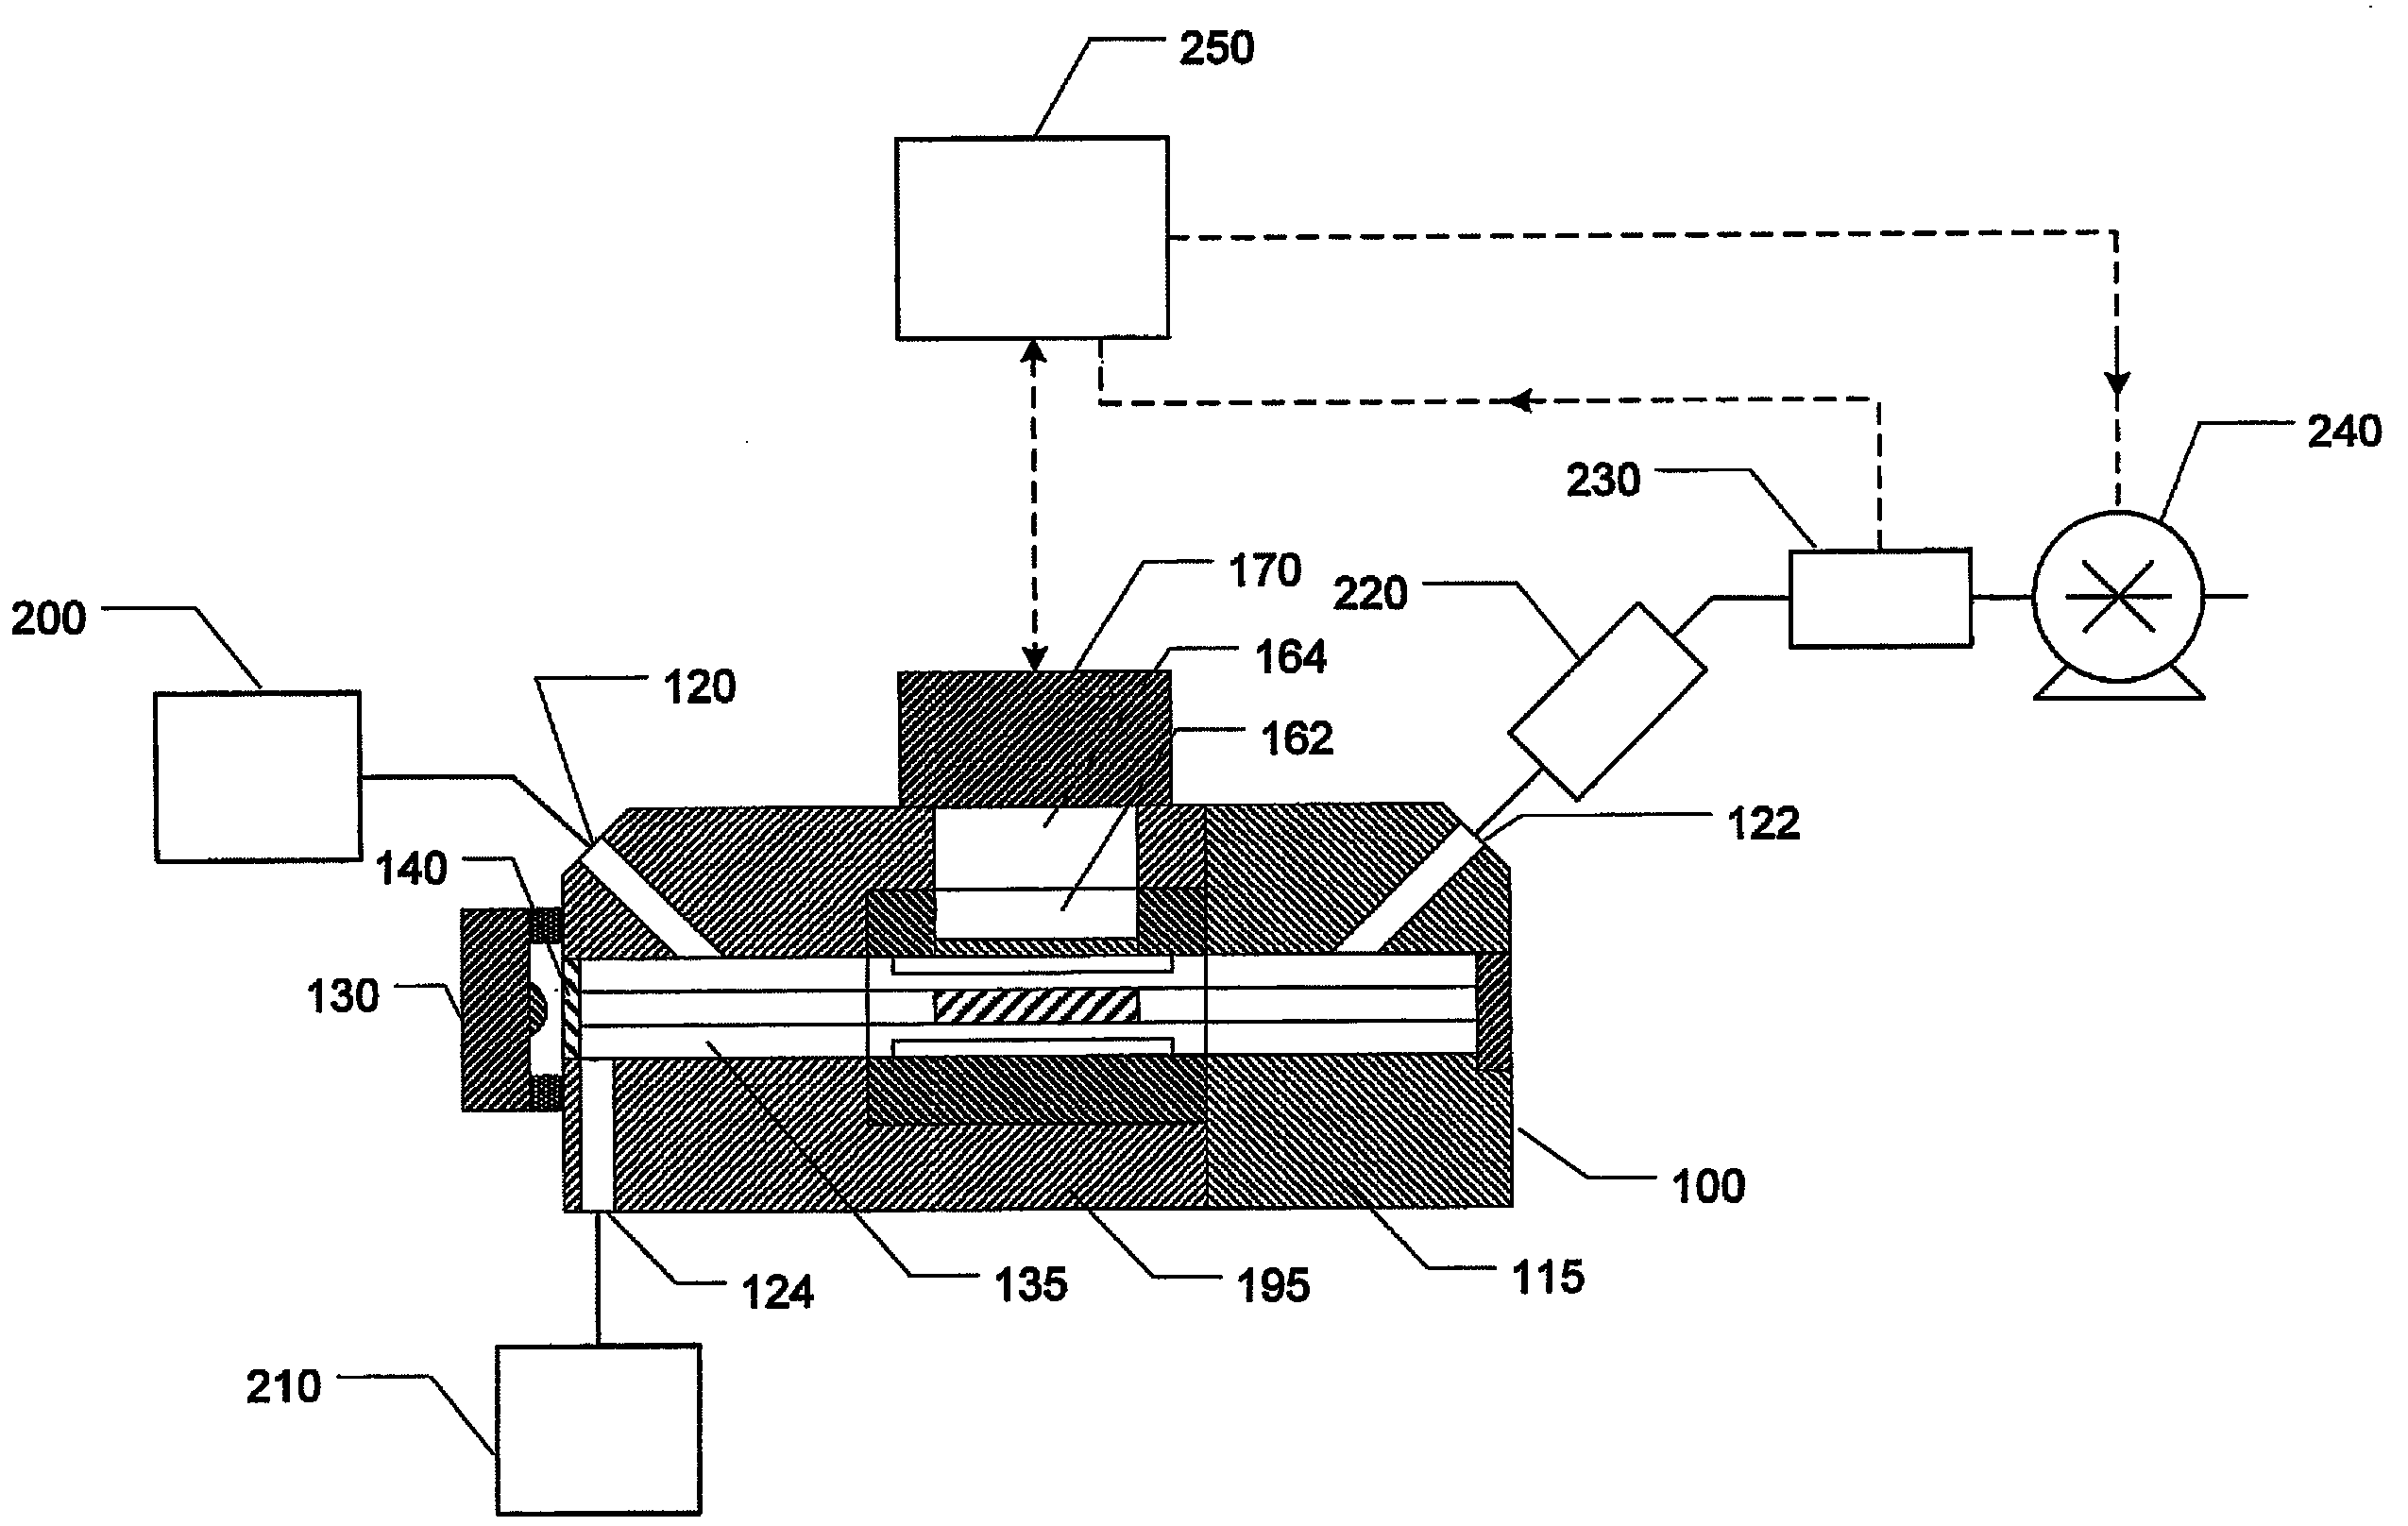 Apparatus for high-accuracy fiber counting in air